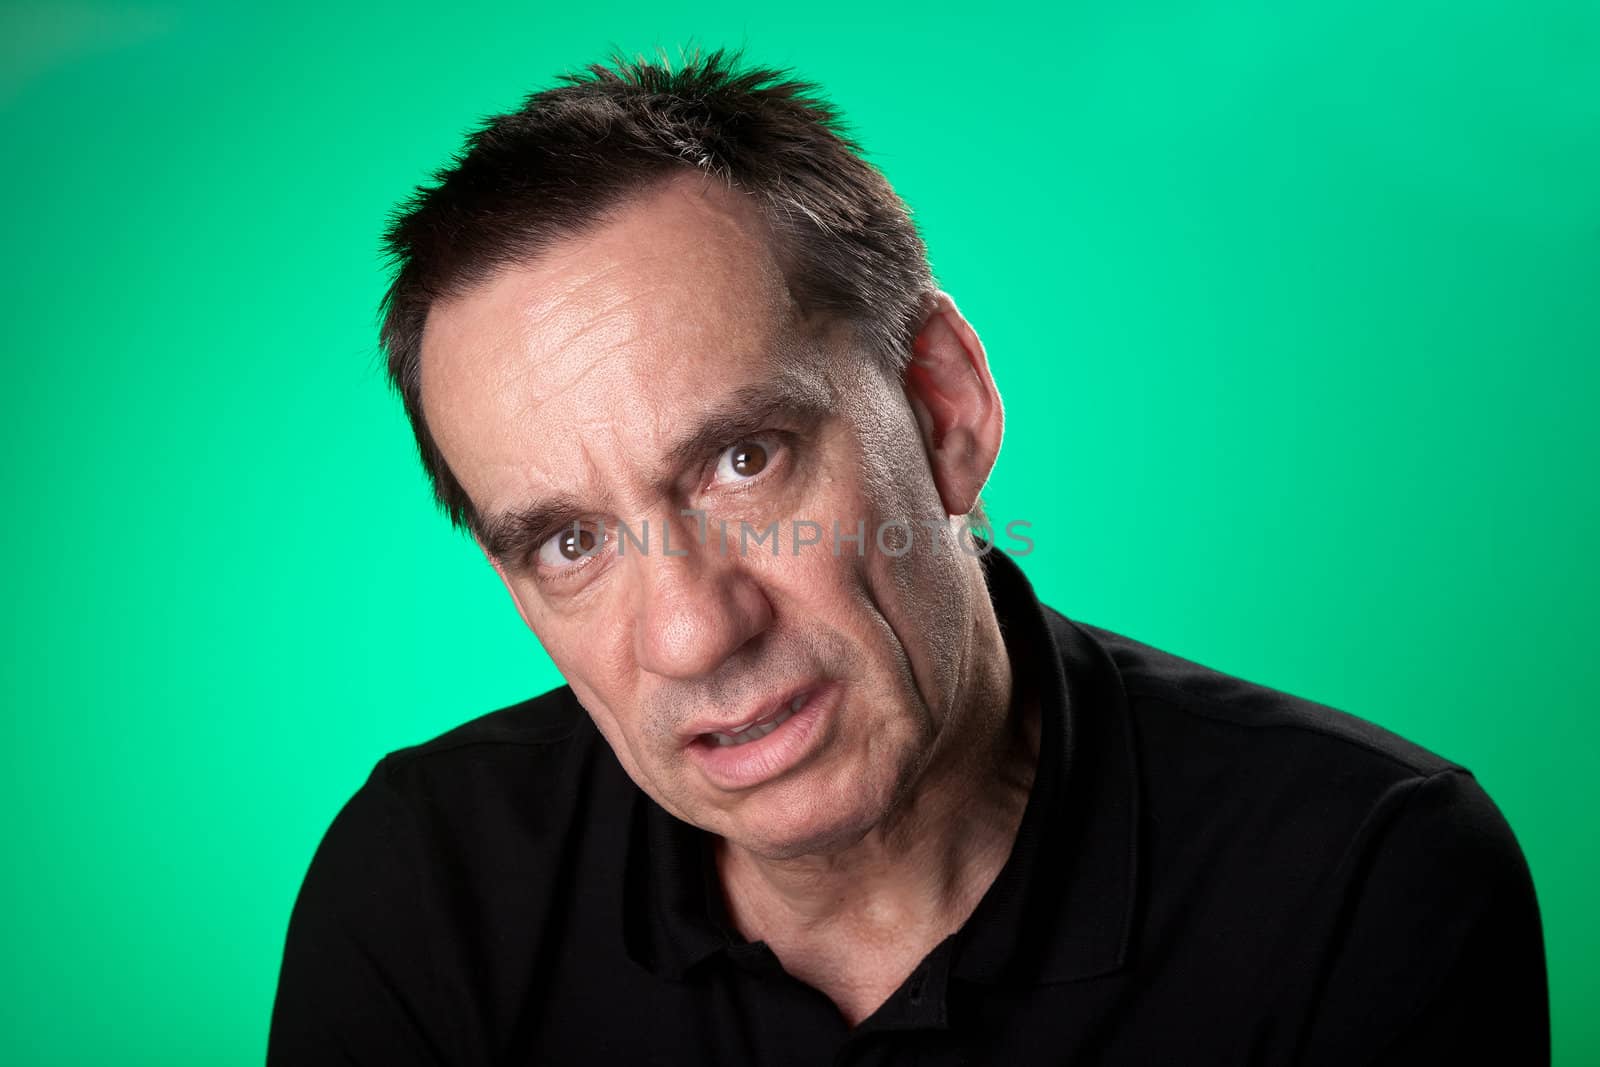 Middle Age Man Looking Sick and Unhappy on Green Background